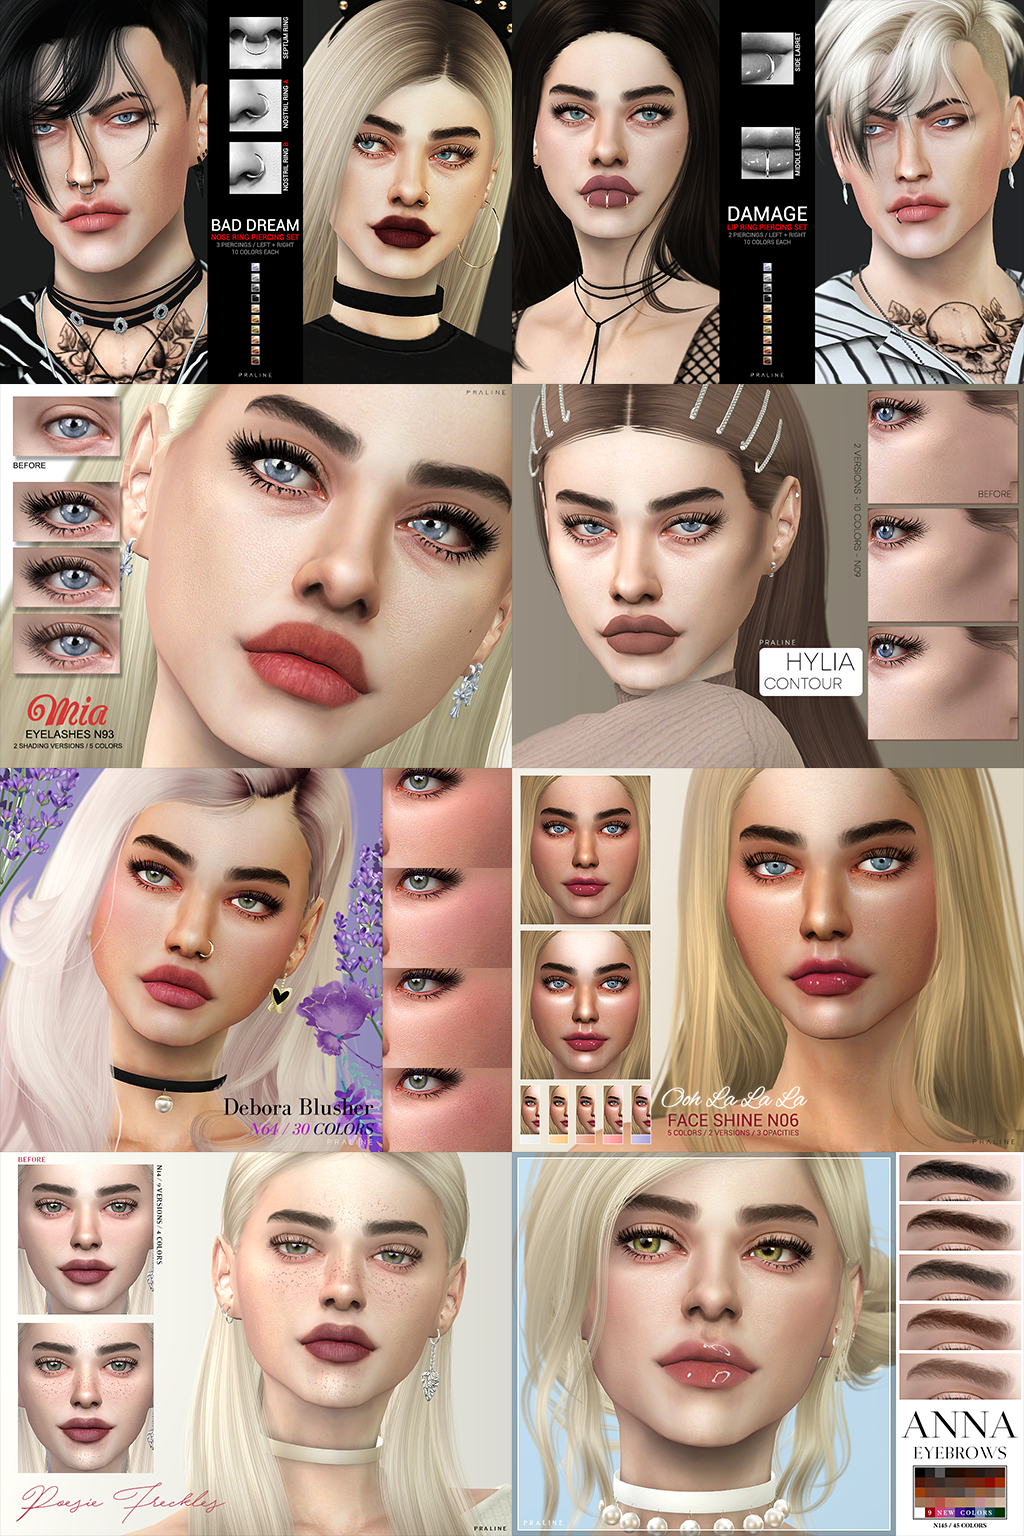 Sims4lover Pralinesims Here S A Showcase Of All The Sims 4 Cc Best Âme Soeur Eyes V2 By